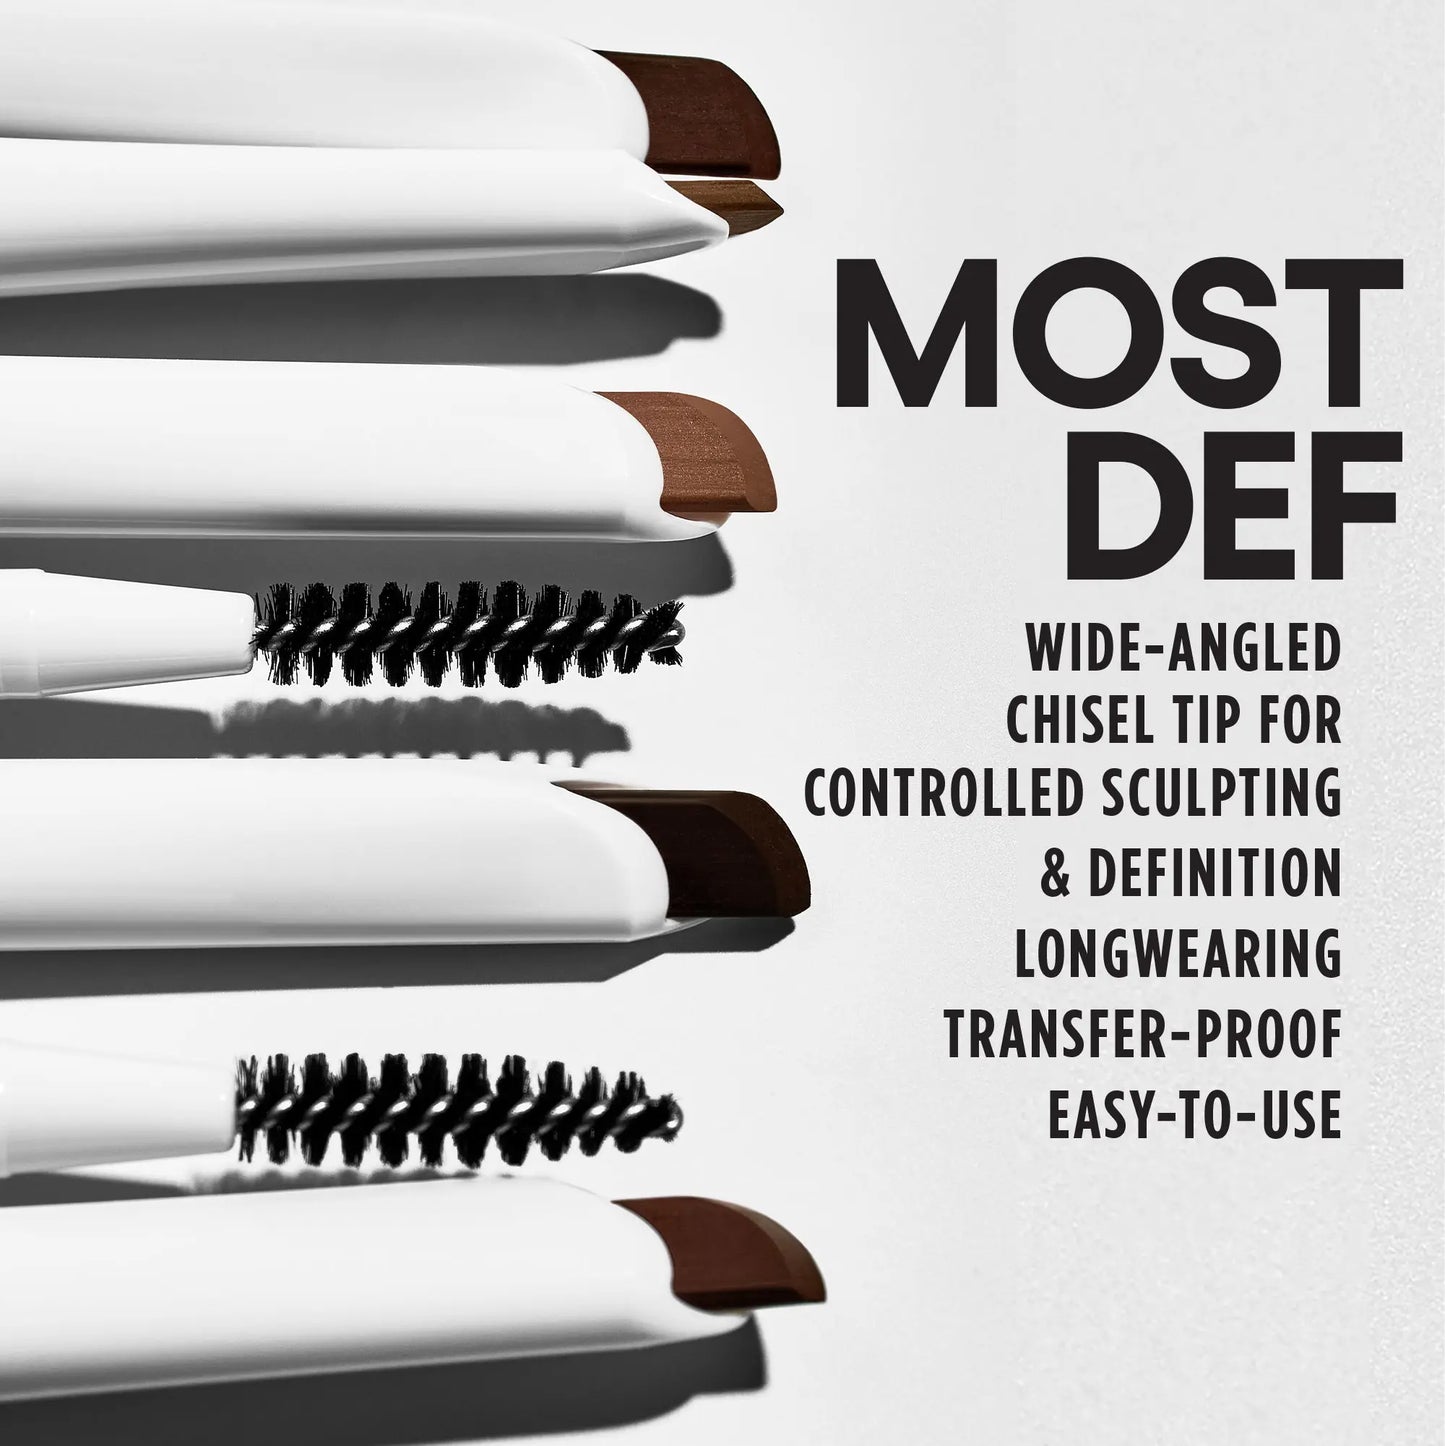 GXVE 4 - Instant Definition Sculpting Eyebrow Pencil For Bold Brows